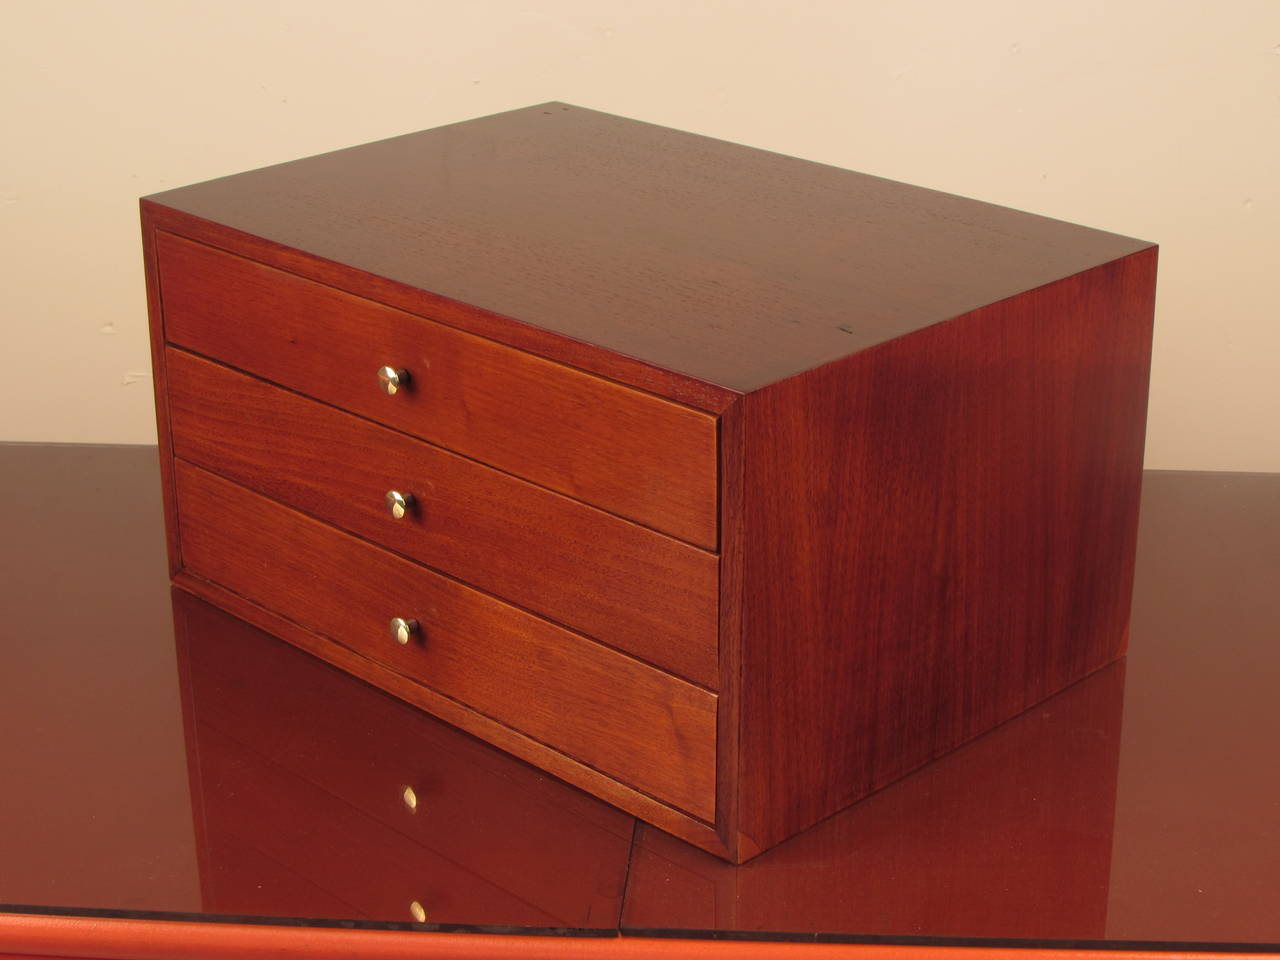 Dapper 3 drawer dresser box or jewelry box in the style of Paul McCobb. The wood appears to be teak and drawer pulls are polished brass. This piece has been fully restored.